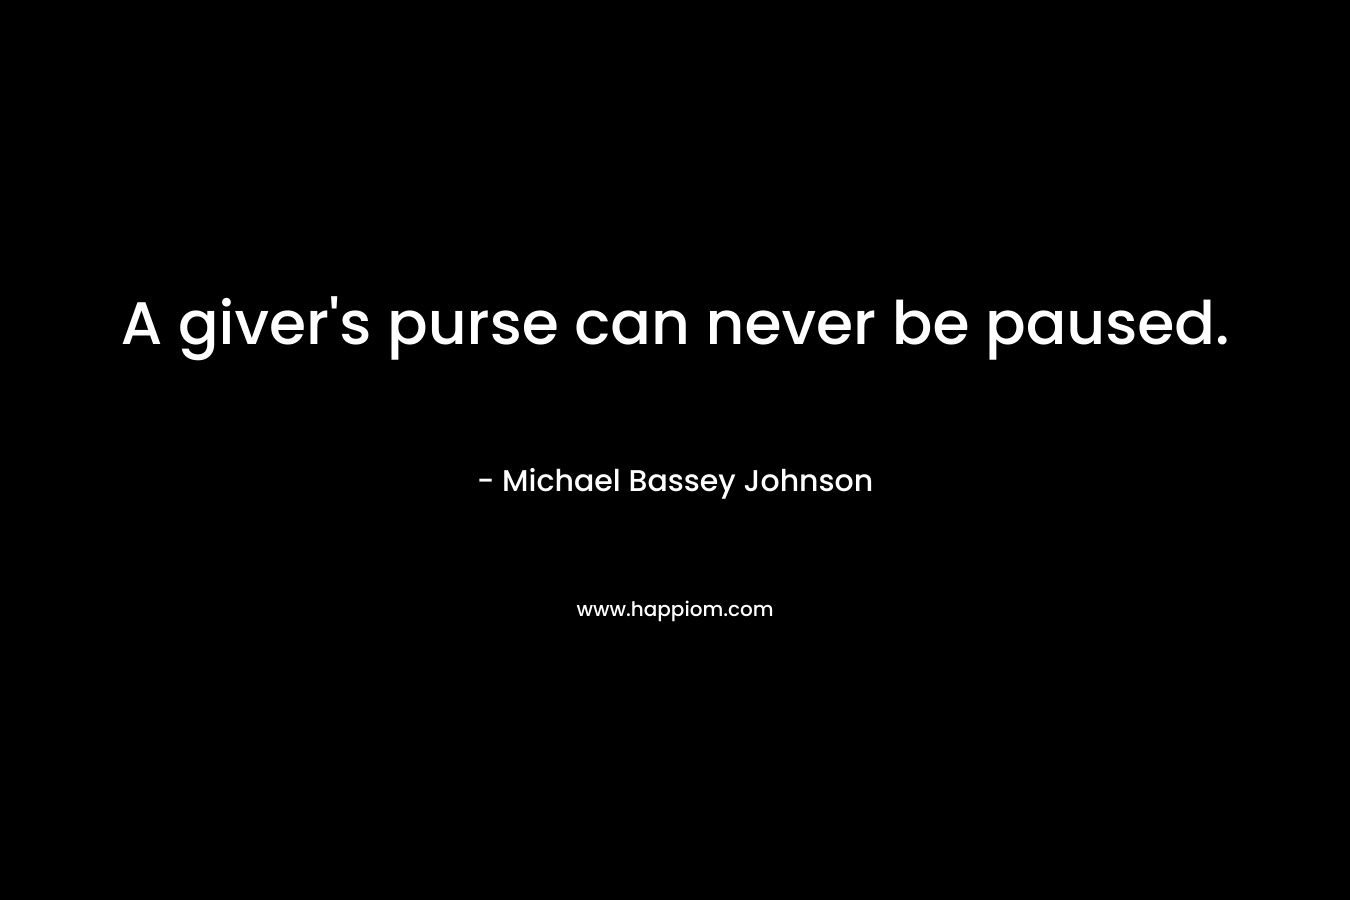 A giver's purse can never be paused.